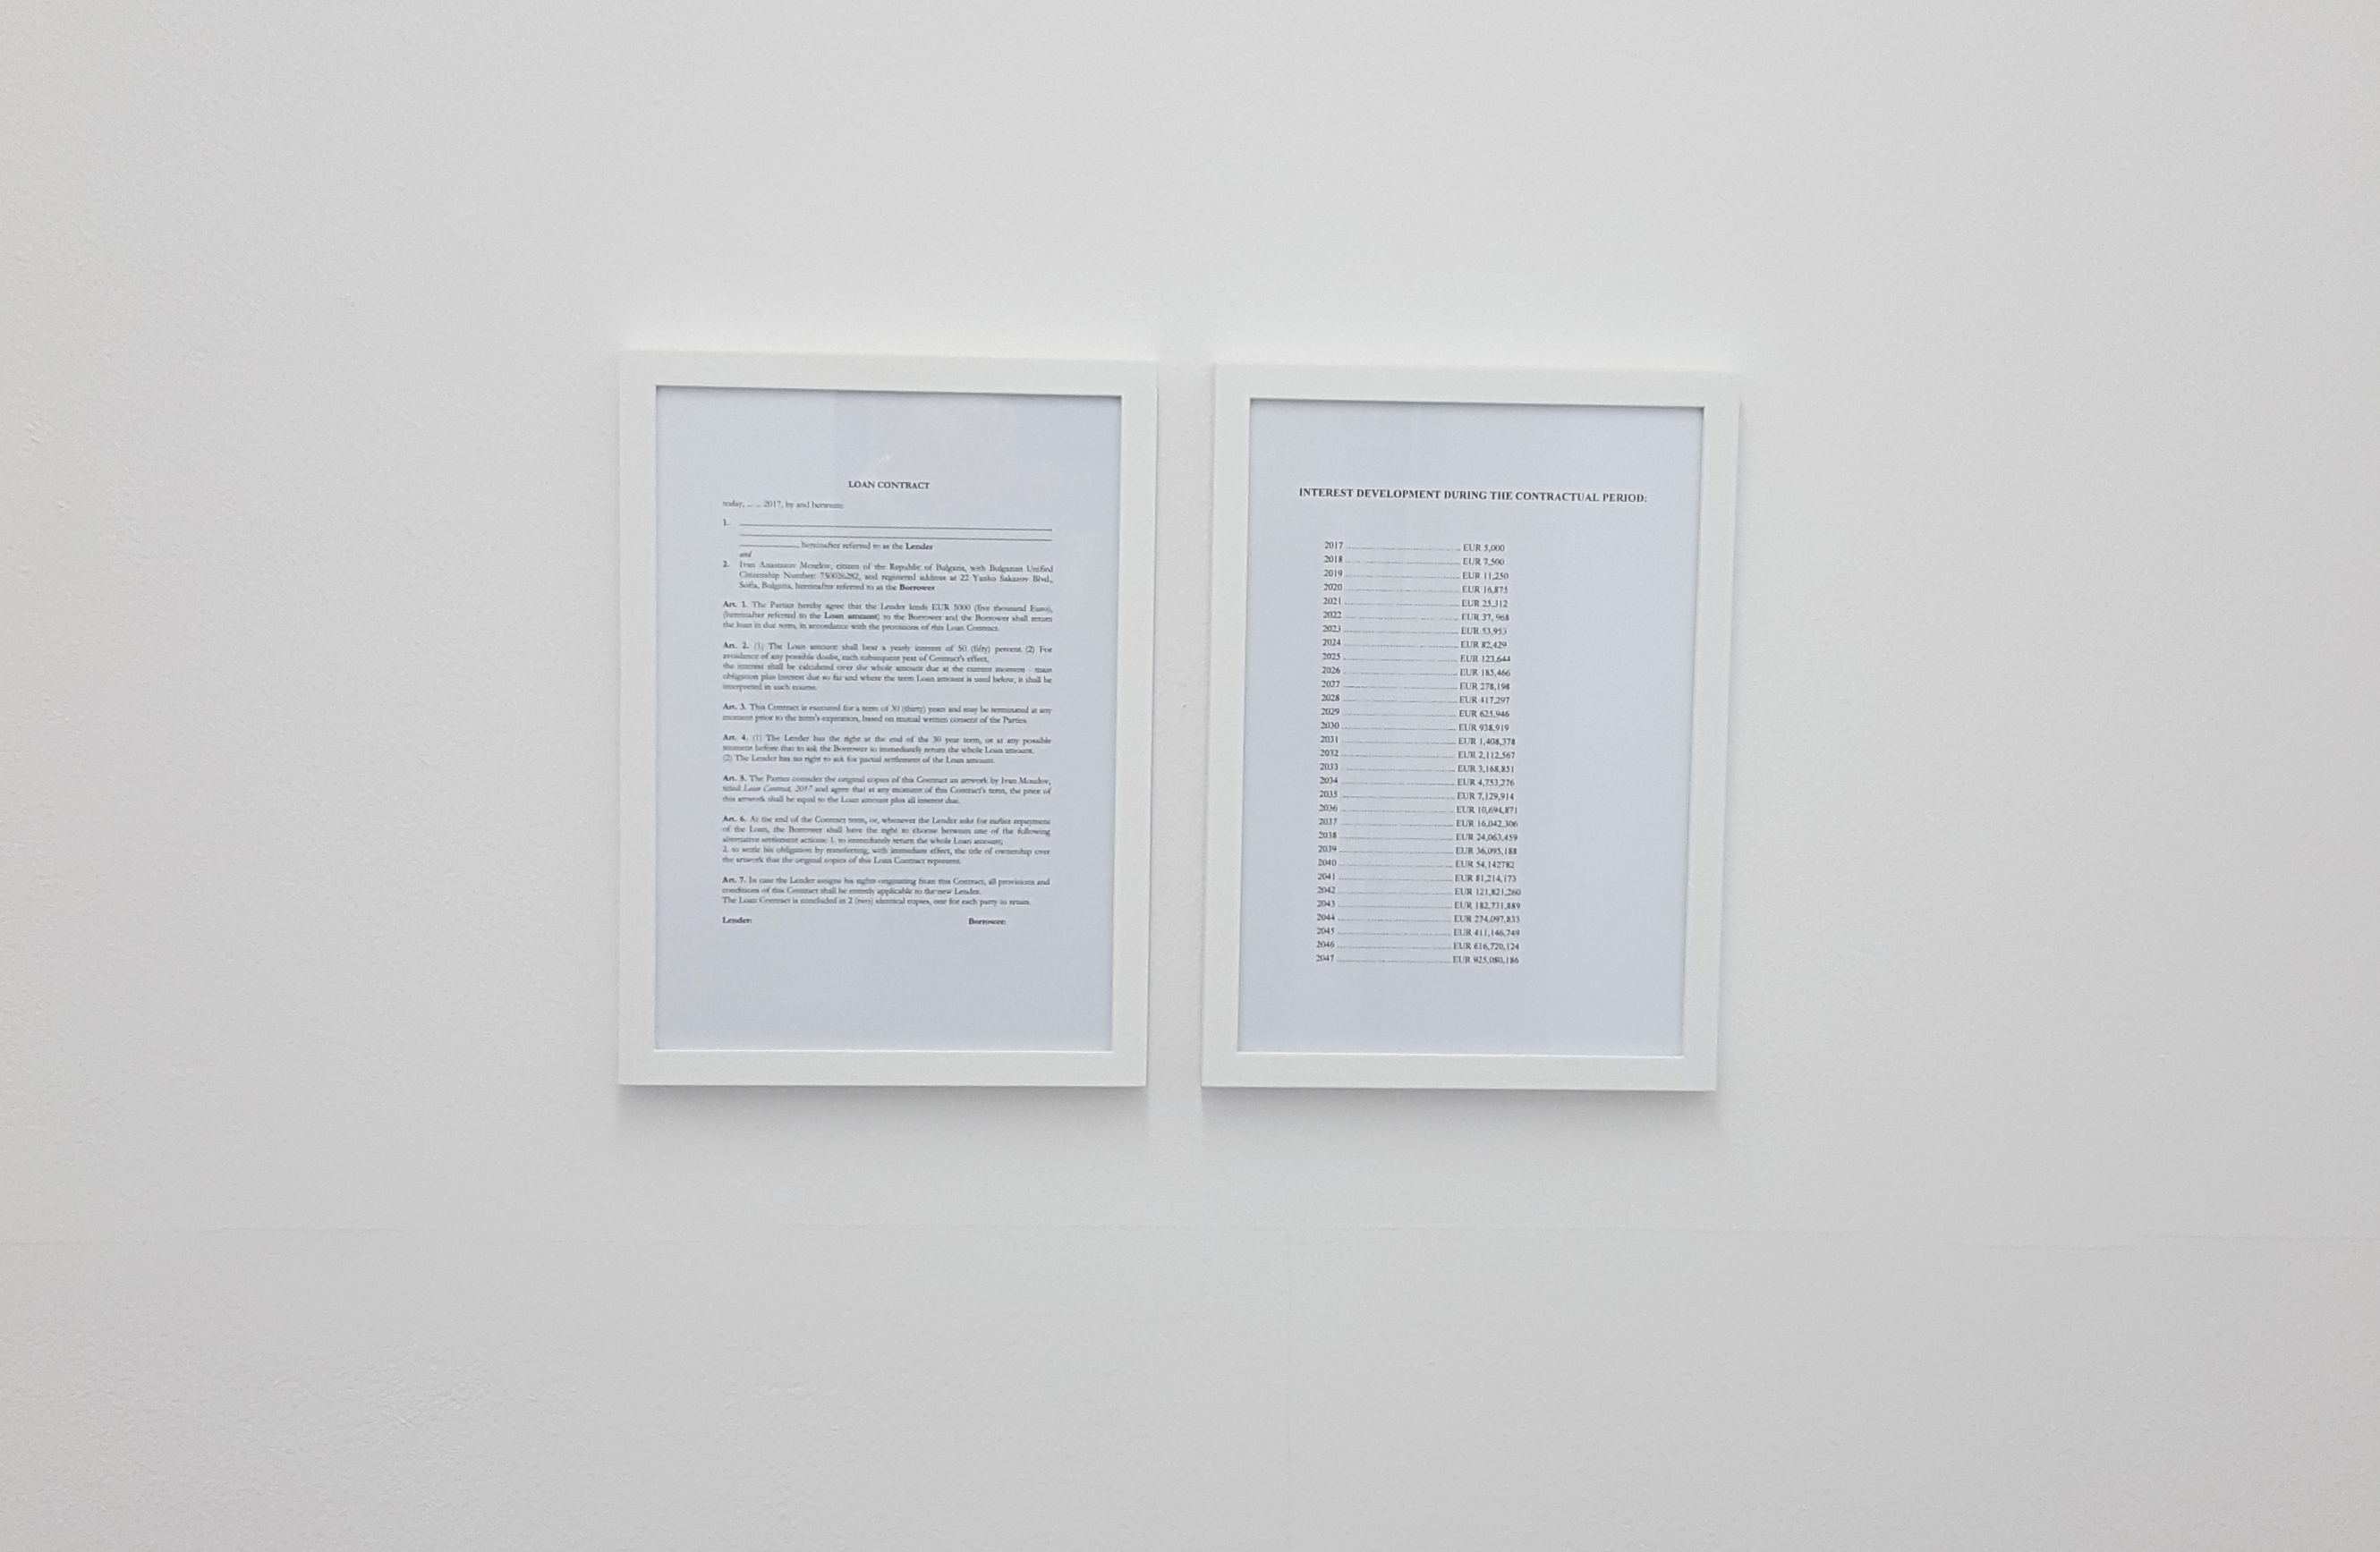 Loan Contract, 2017. Installation, two A4 framed documents, Installation view, Galerie Alberta Pane, Venice